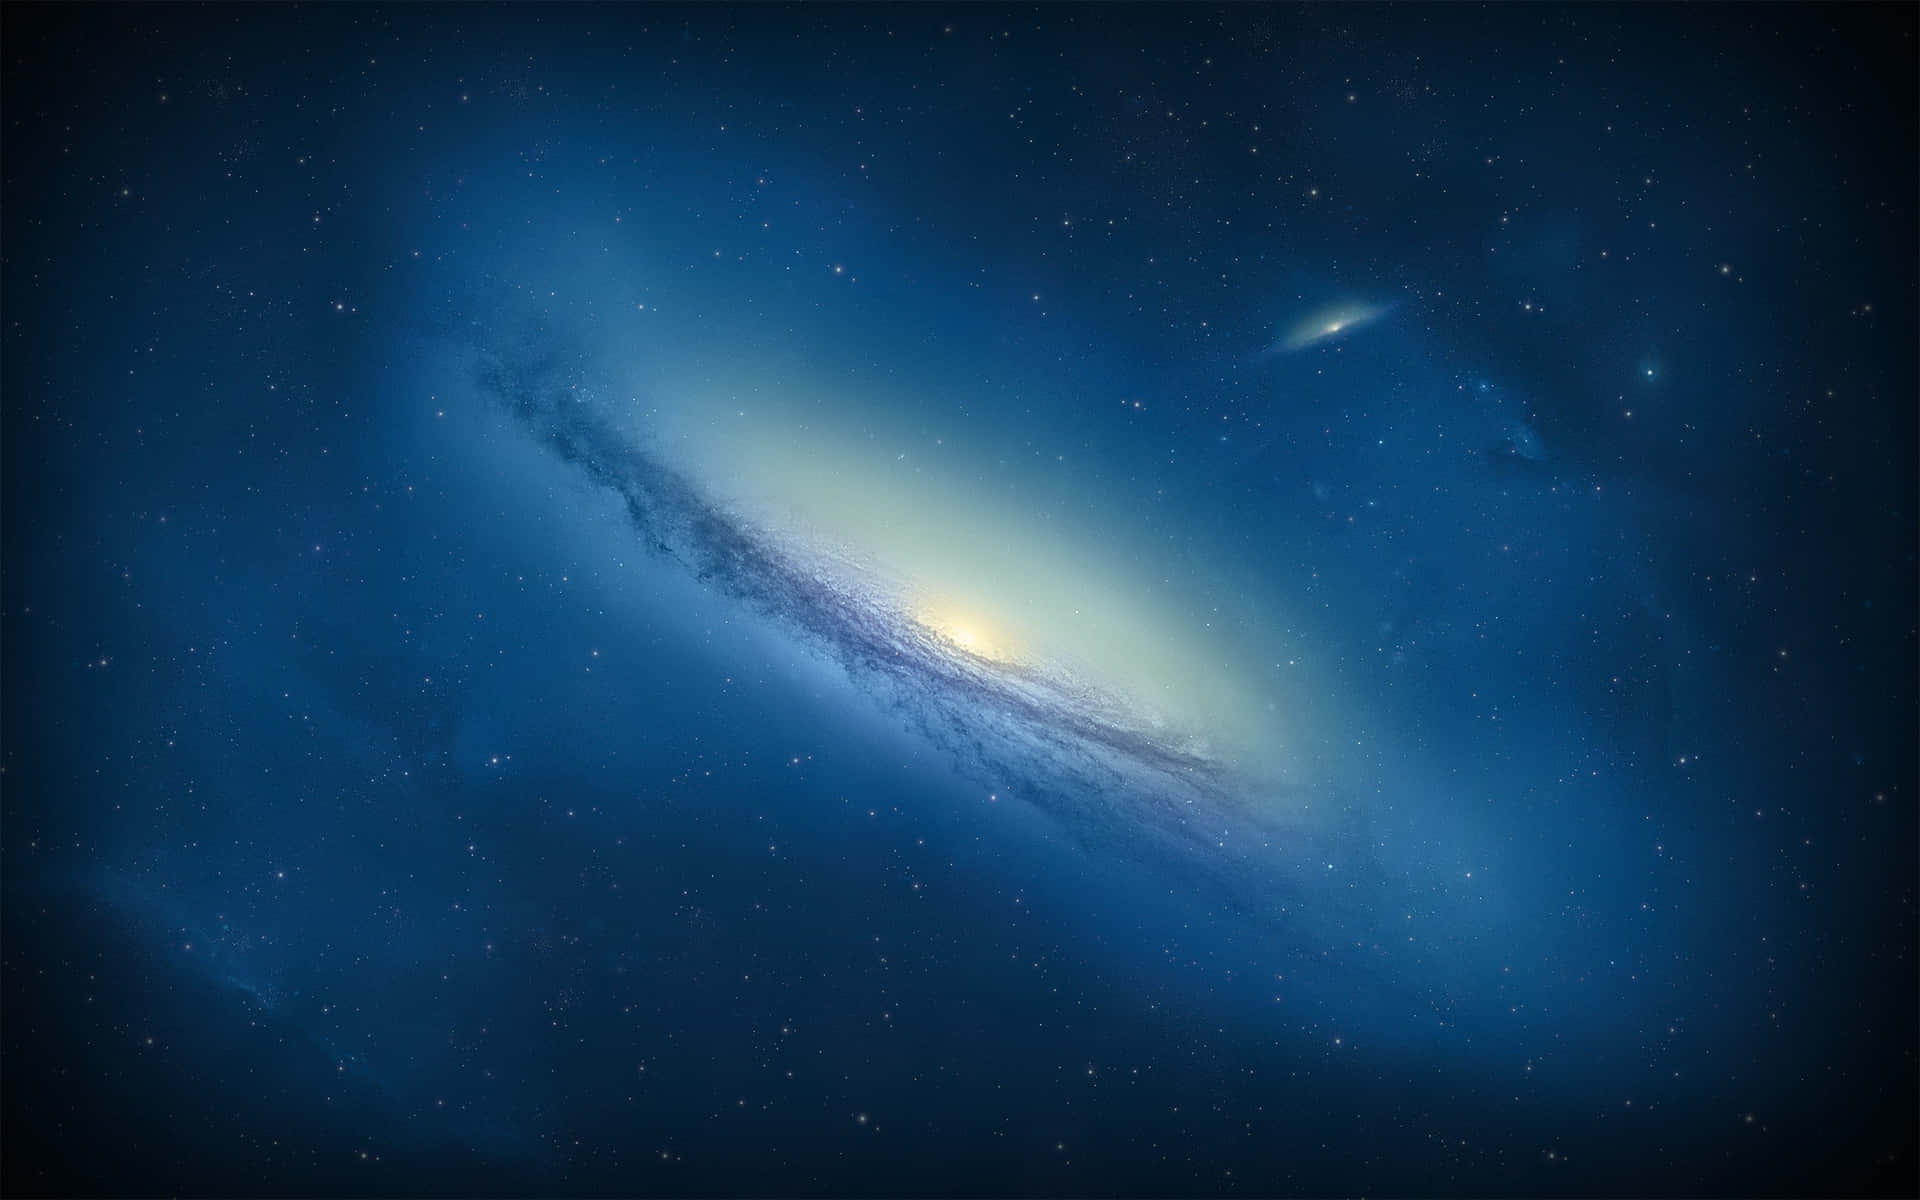 View of the Andromeda Galaxy in 4K Resolution Wallpaper